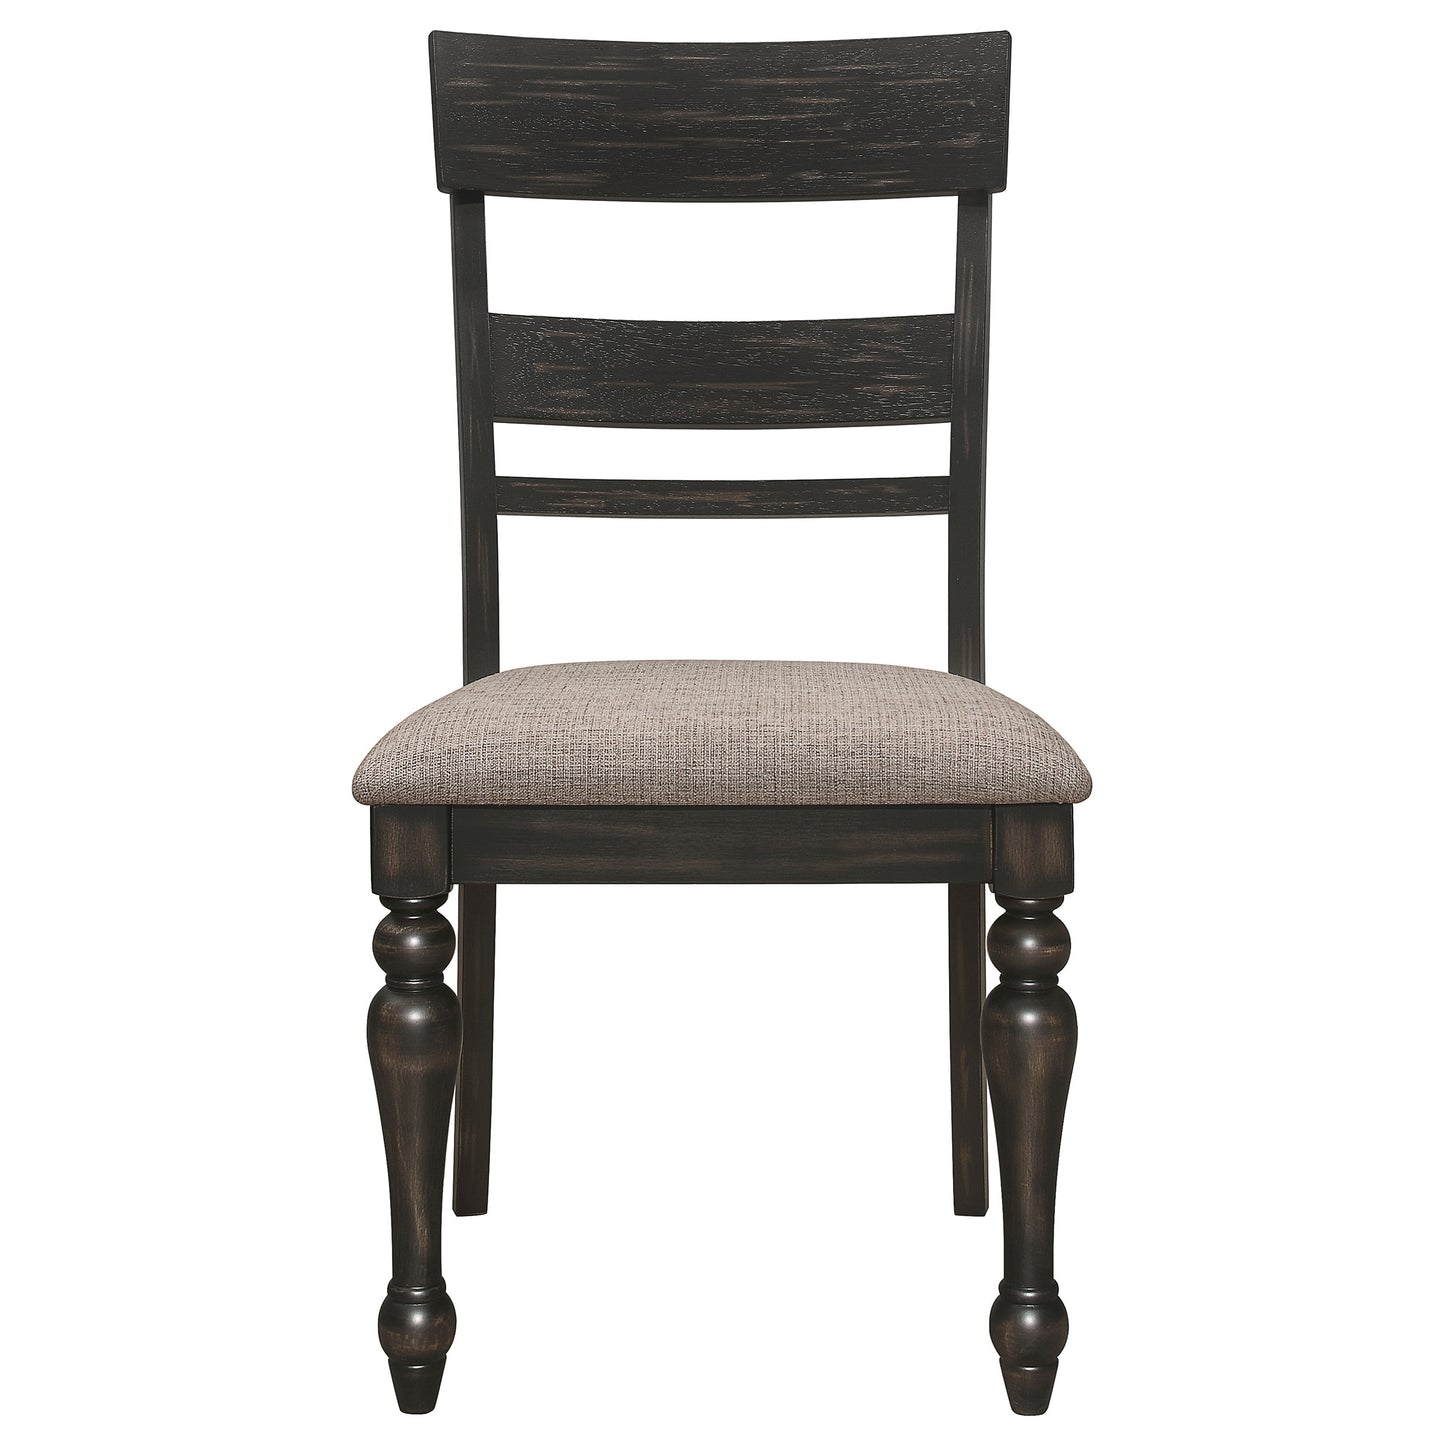 Bridget Ladder Back Dining Side Chair Stone Brown and Charcoal Sandthrough (Set of 2)